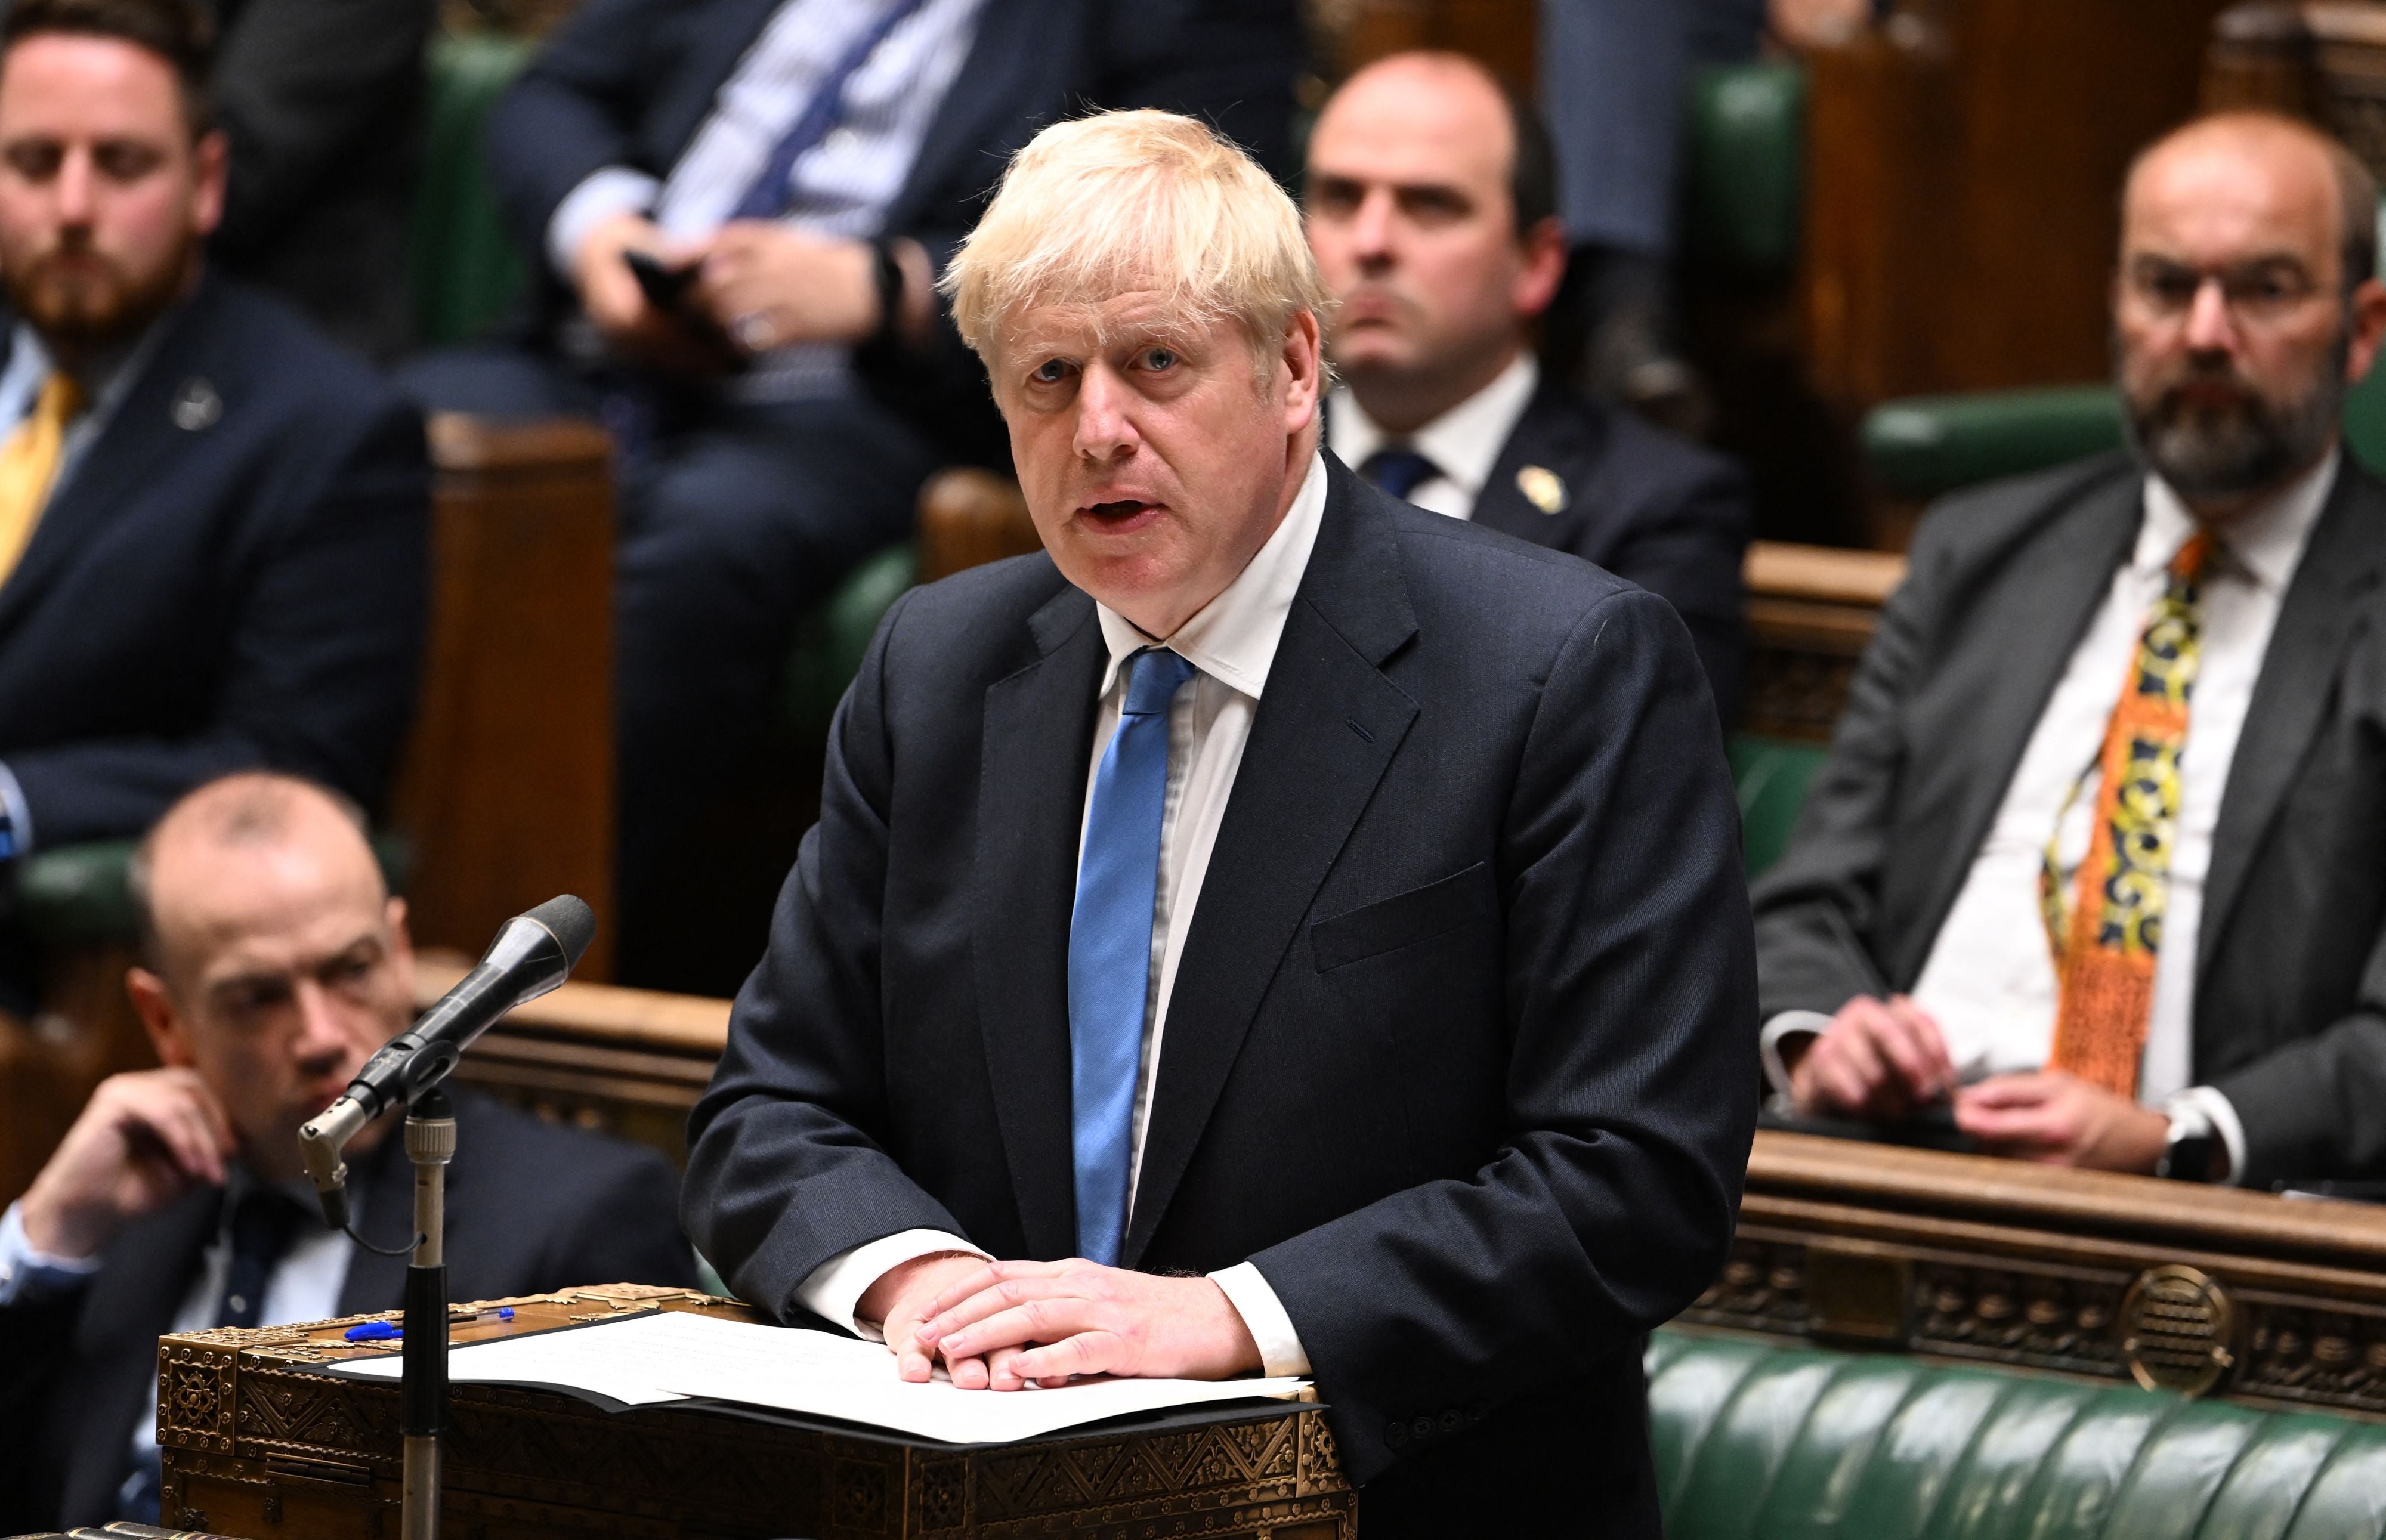 Boris Johnson will be desperately trying to lock in other ministers, knowing that the loss of one or two more senior figures would spell the end for him